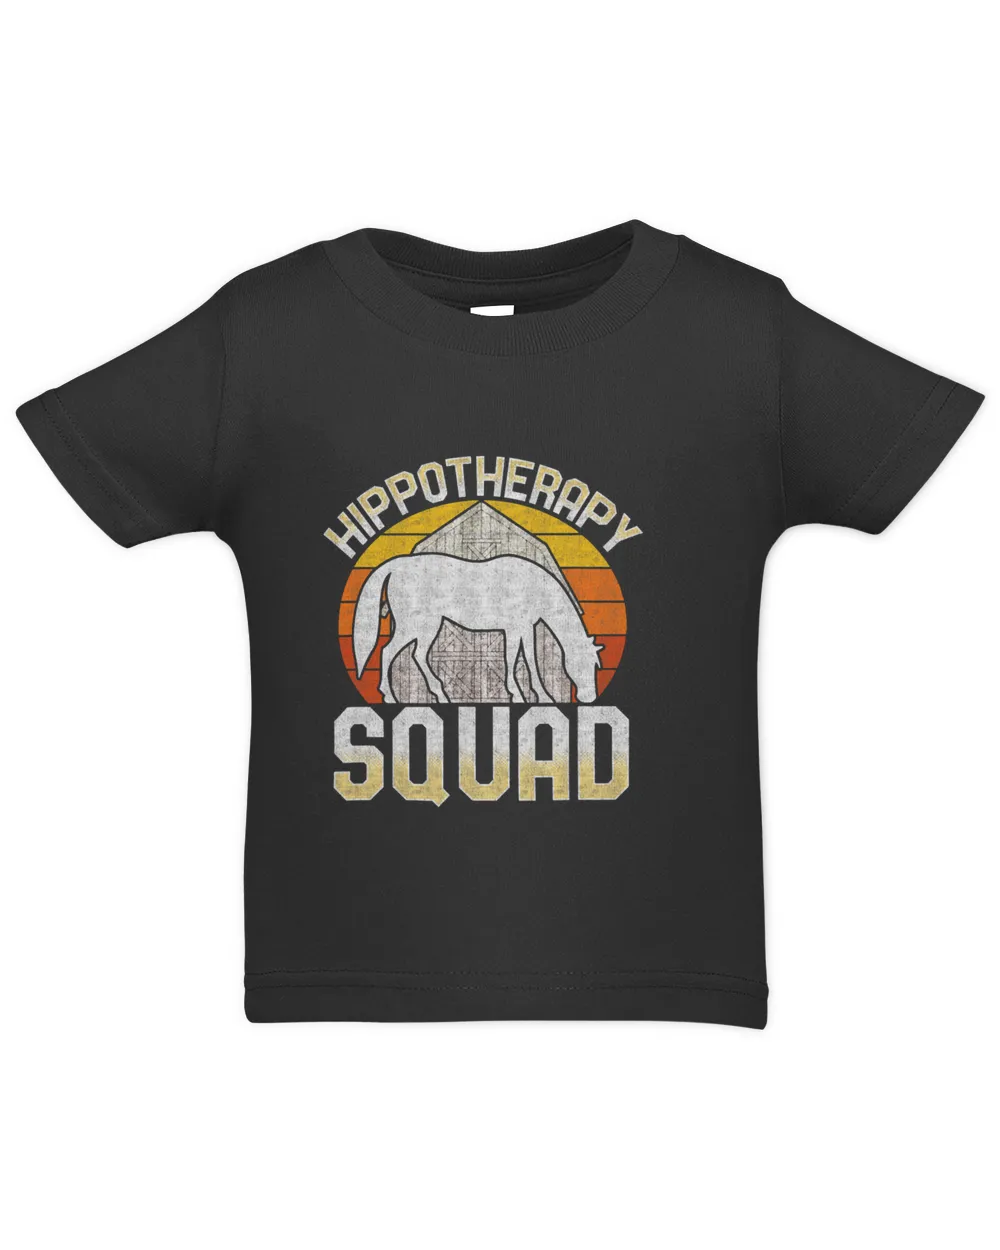 Equine Assisted Horse Therapy Therapist Hippotherapy Squad